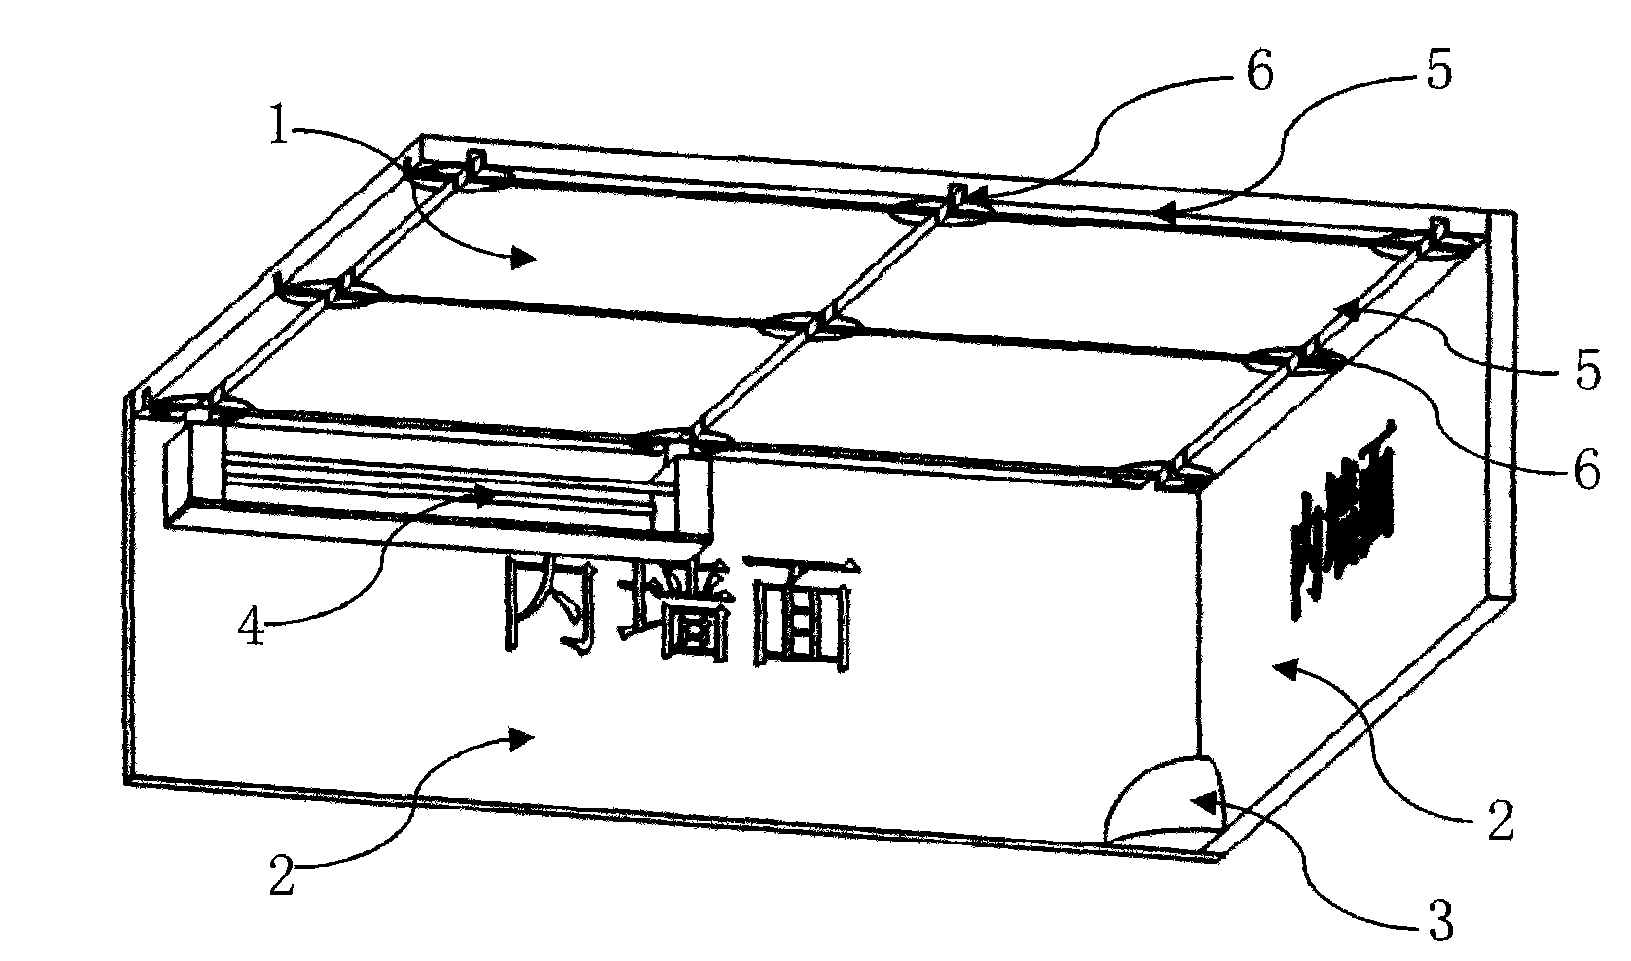 Cleaning, repairing and transporting equipment capable of walking on roofs in rail transfer mode